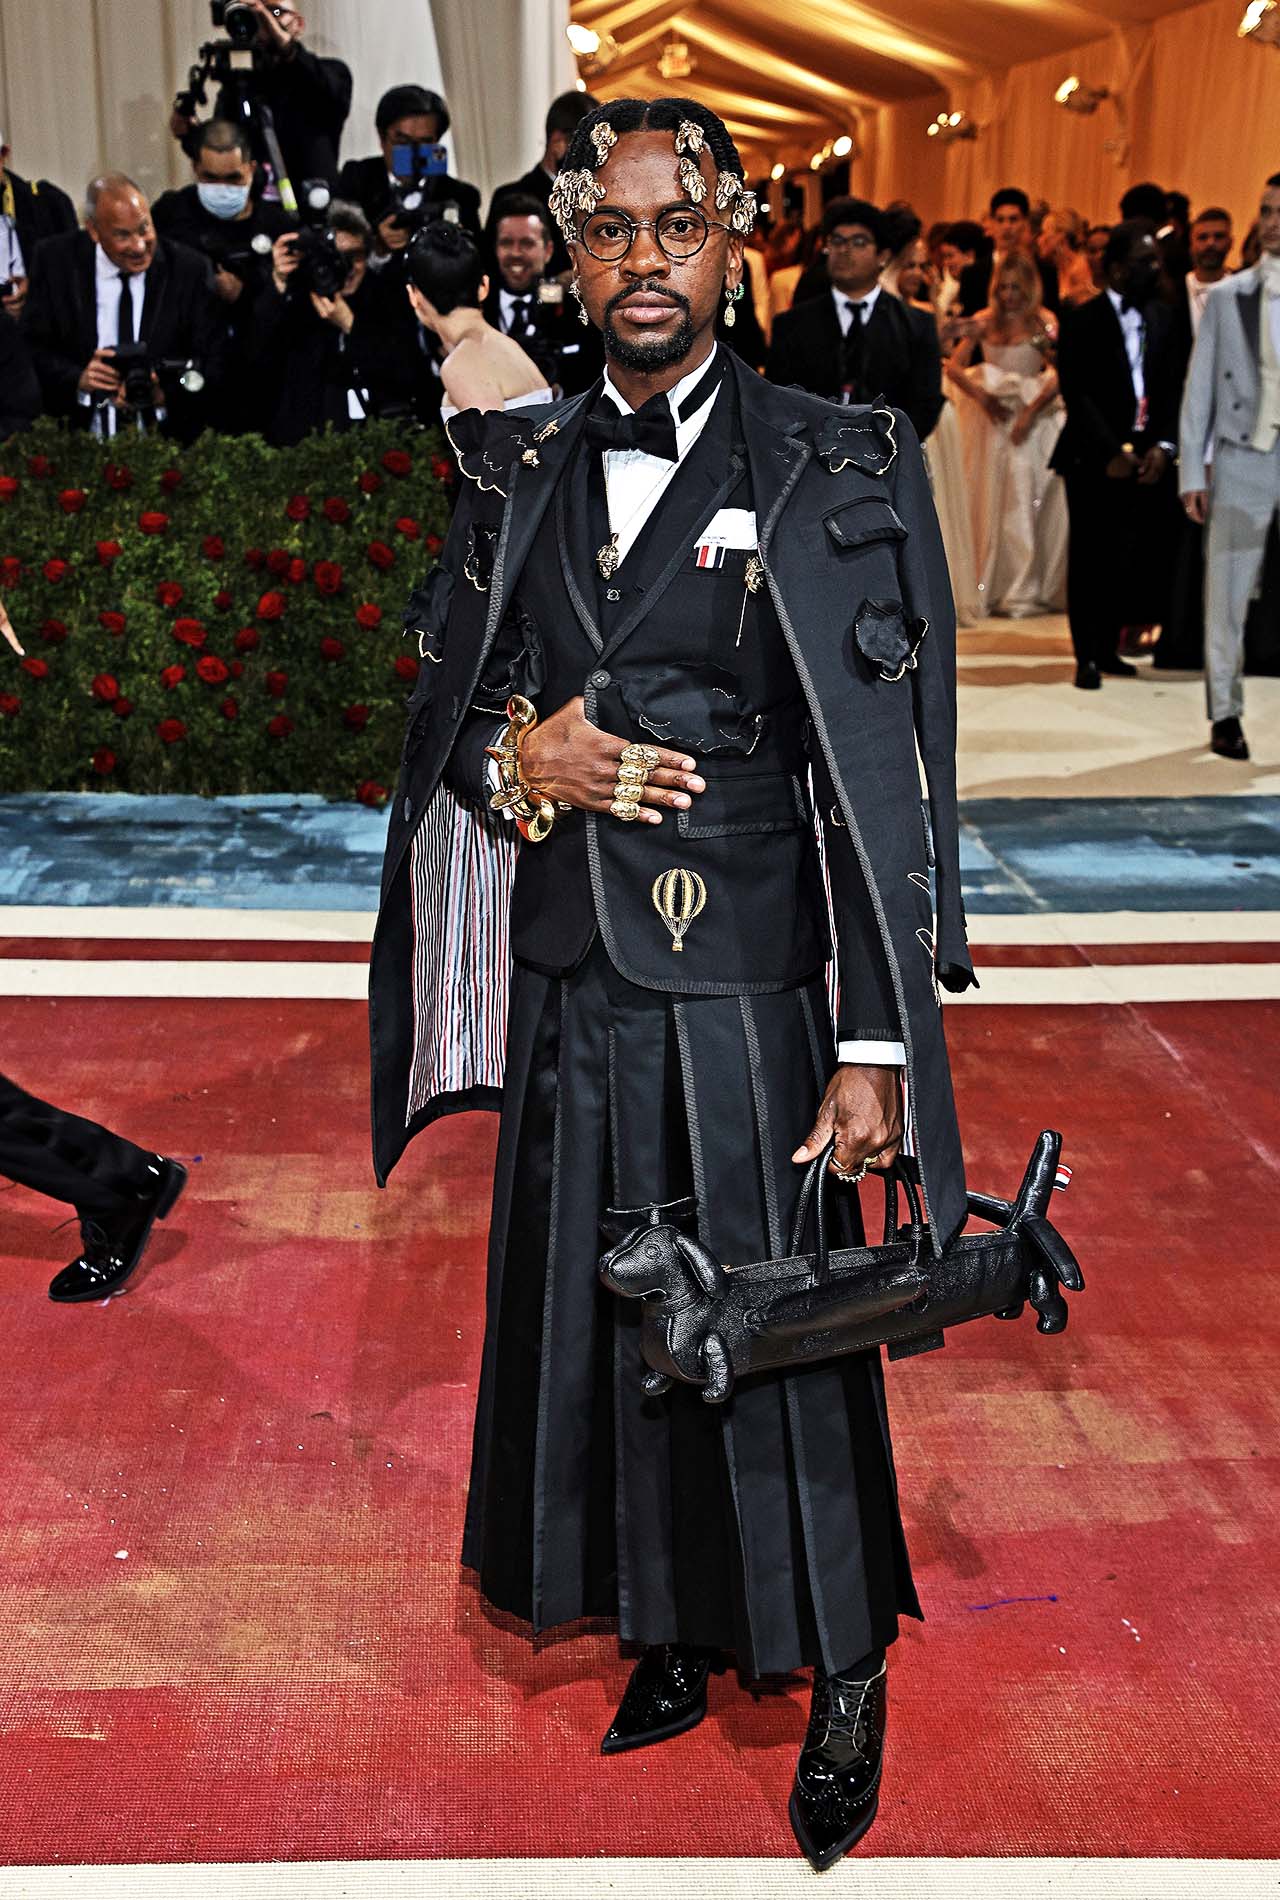 All The Best Dressed Men At the Met Gala Gilded Glamour